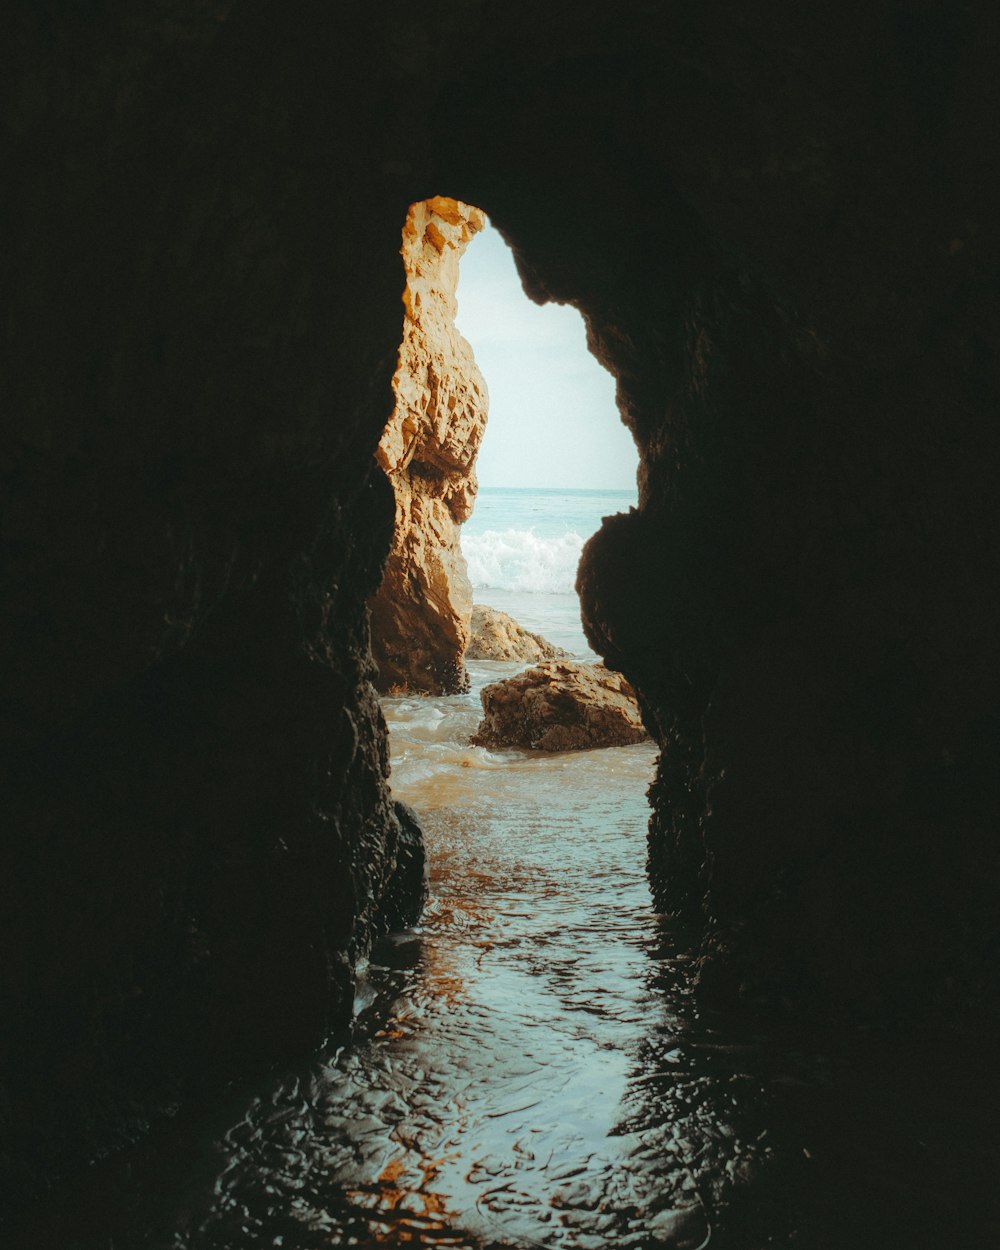 cave near body of water during daytime